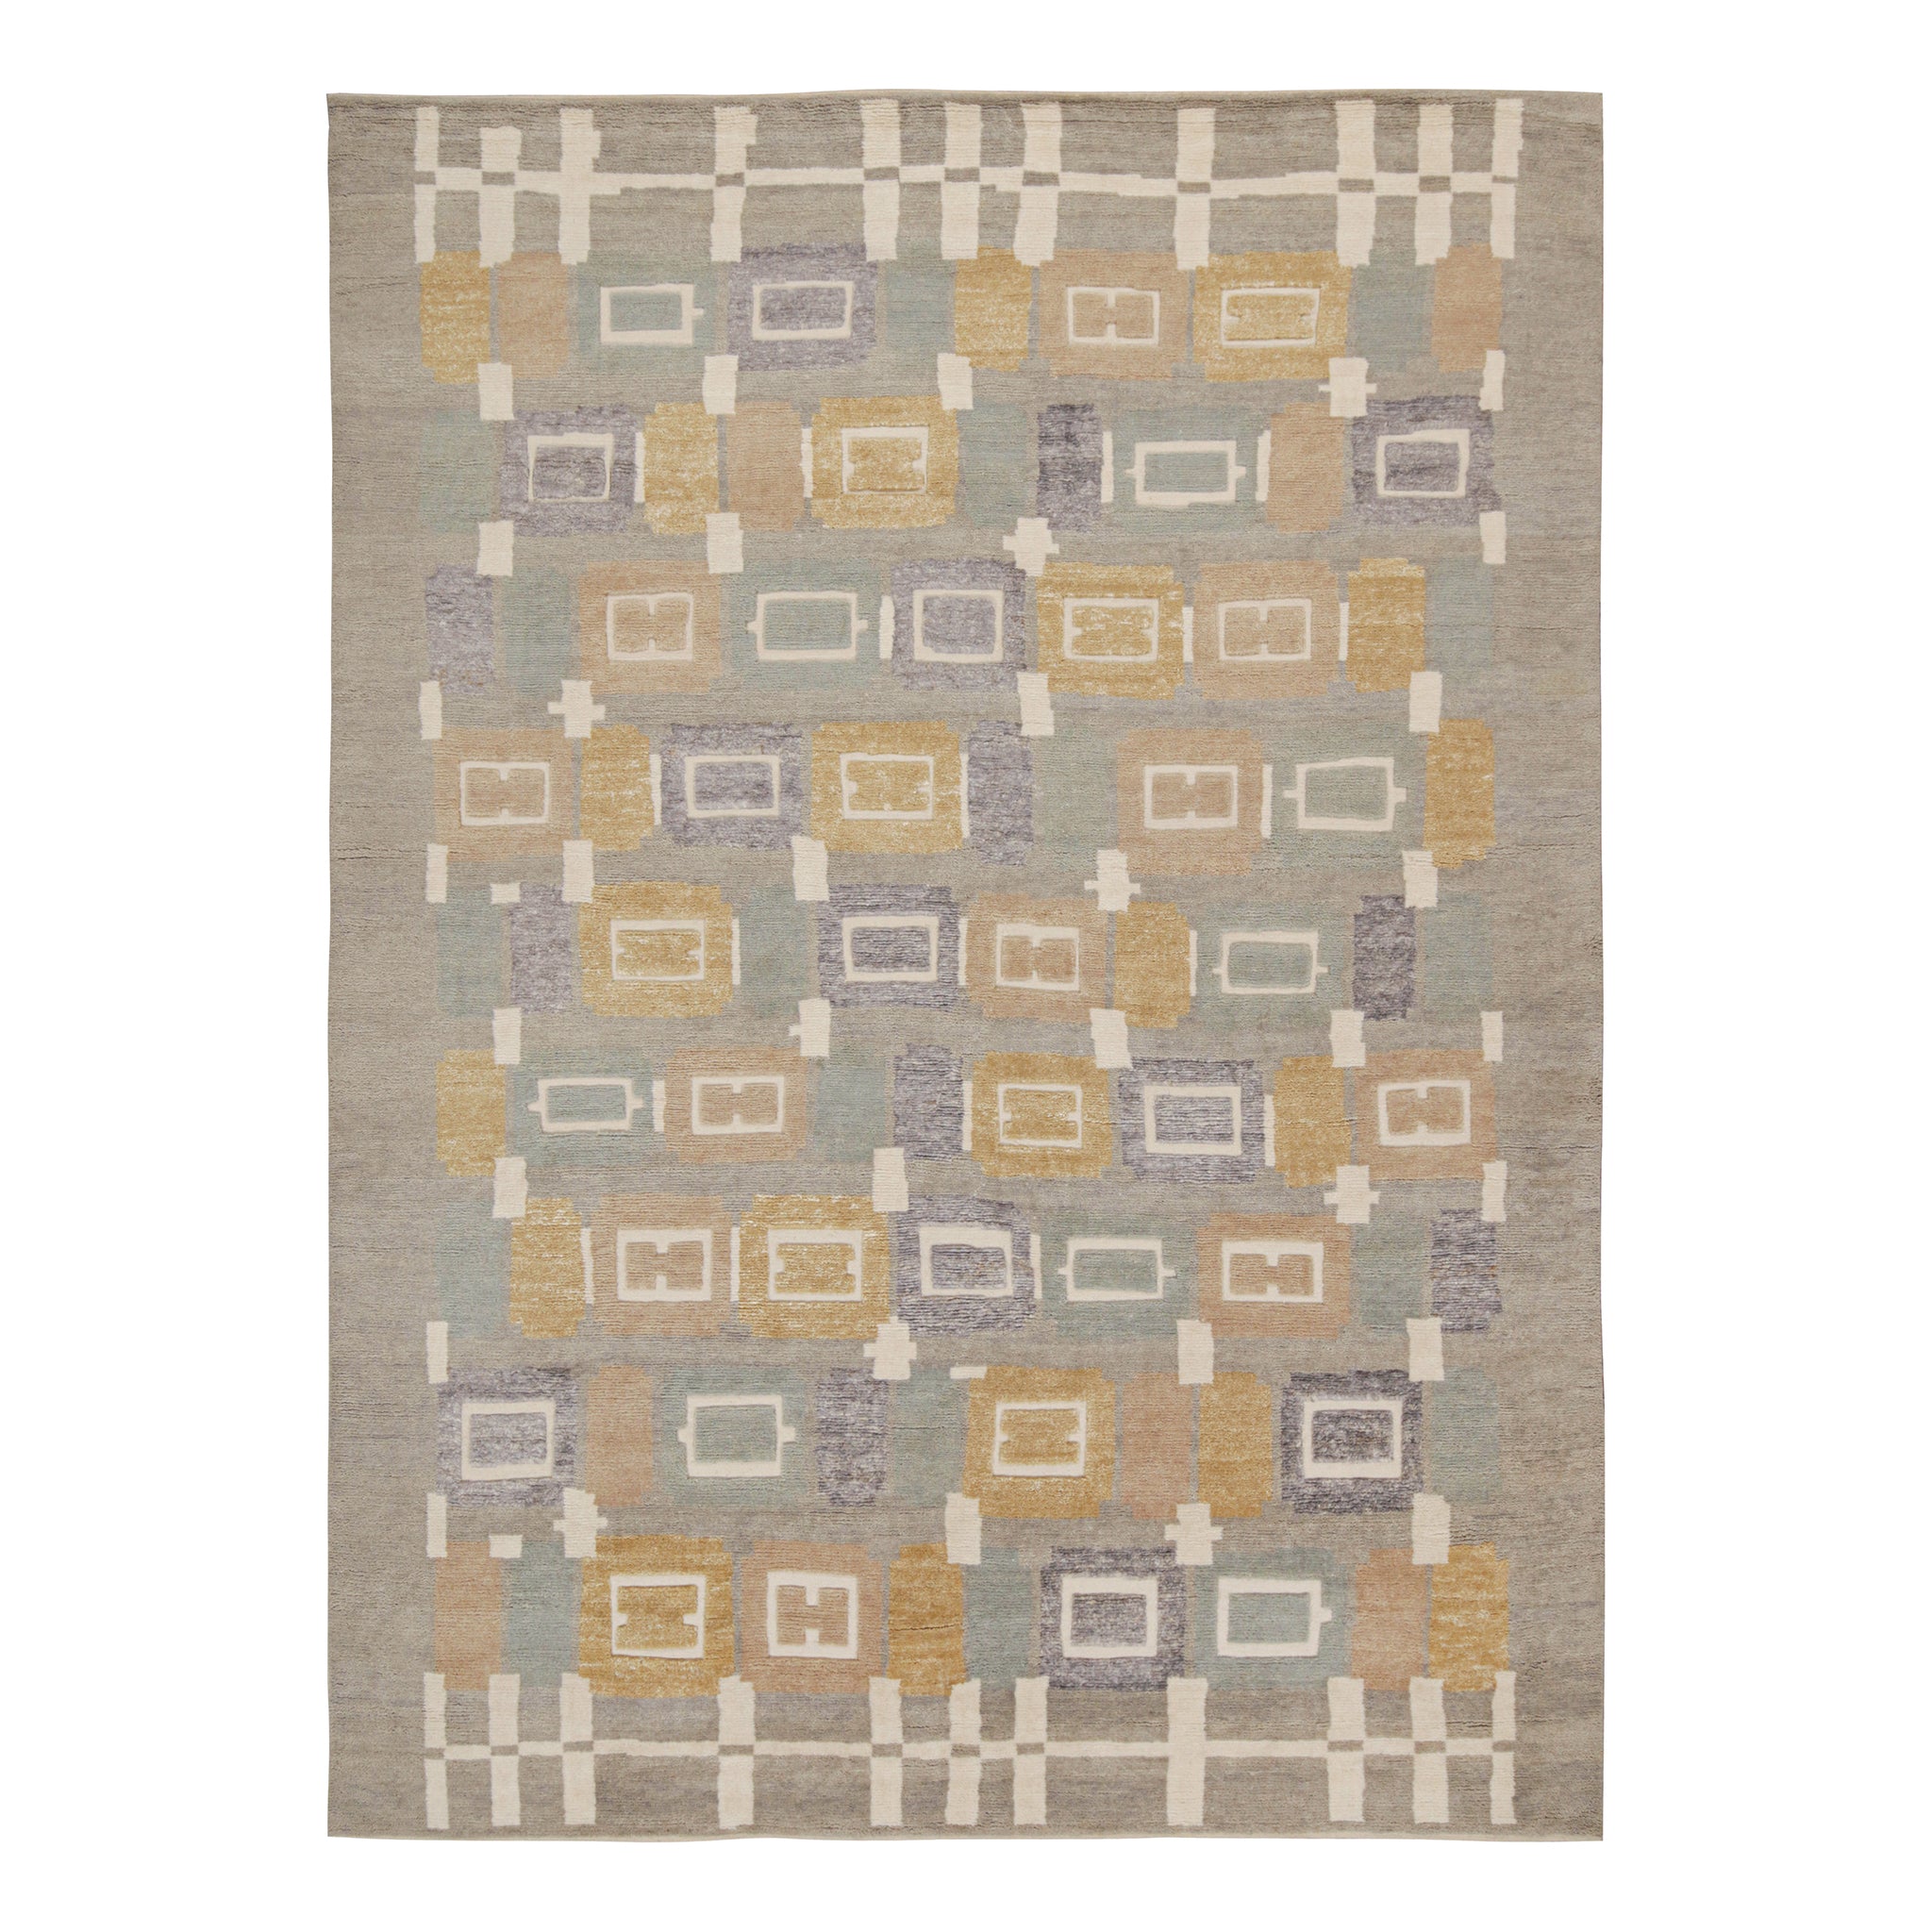 Nordic style stone wall pattern carpet for bedroom Rectangular